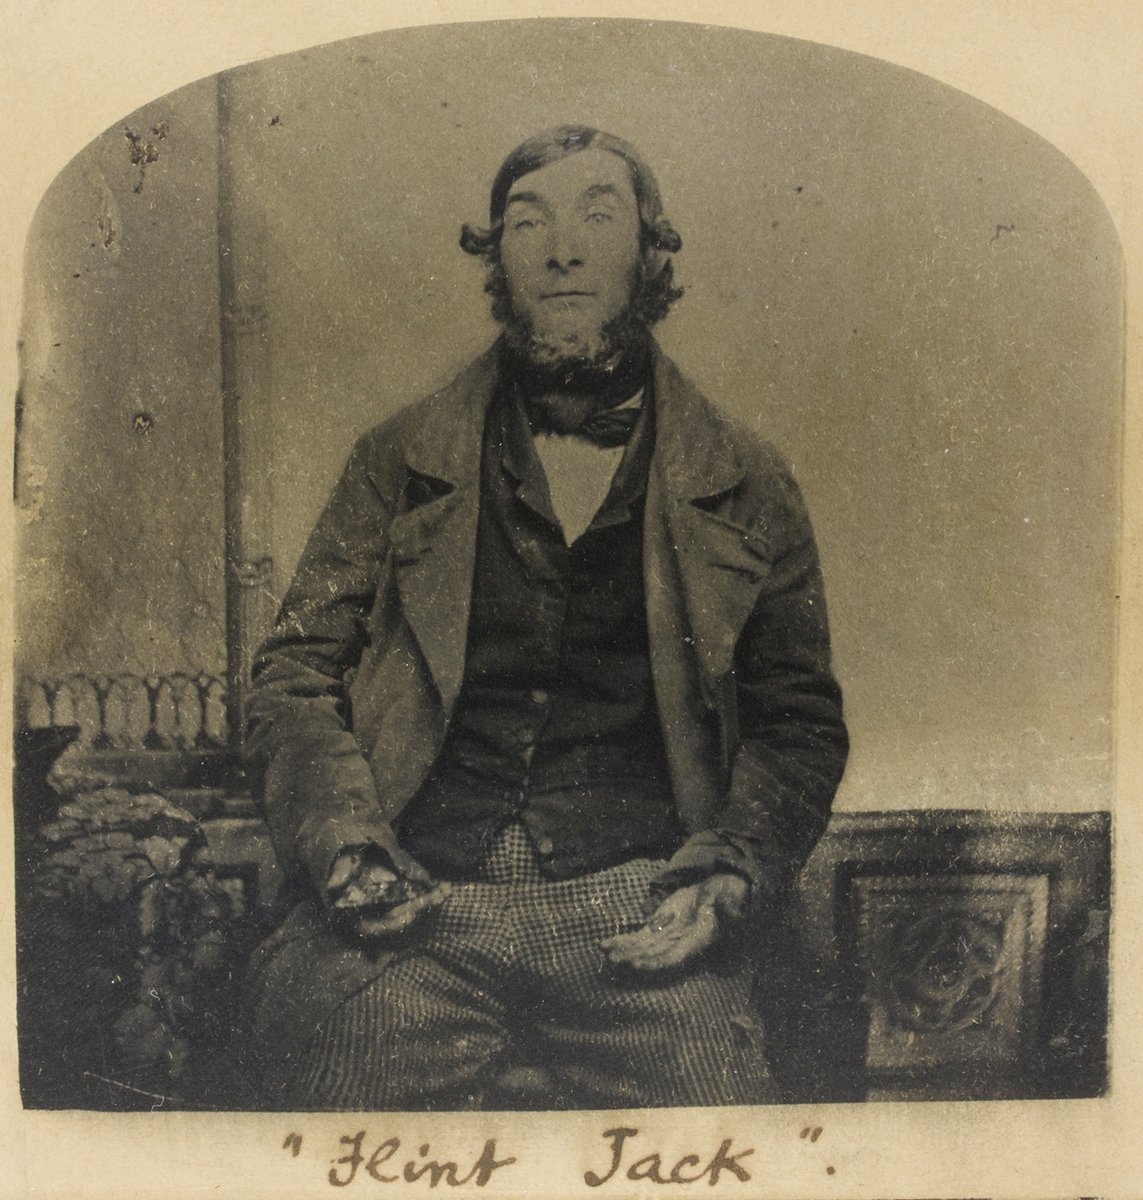 THREAD: Photographs of Victorian Britain’s most famous  #forger, Edward  #Simpson, aka  #Flint  #Jack (c.1815-c.1874). There are few early images, but this one shows him as an itinerant  #fossil and  #antiquities dealer, holding a flint handaxe and arrowhead. Image:  @ntlmuseumsScot 1/